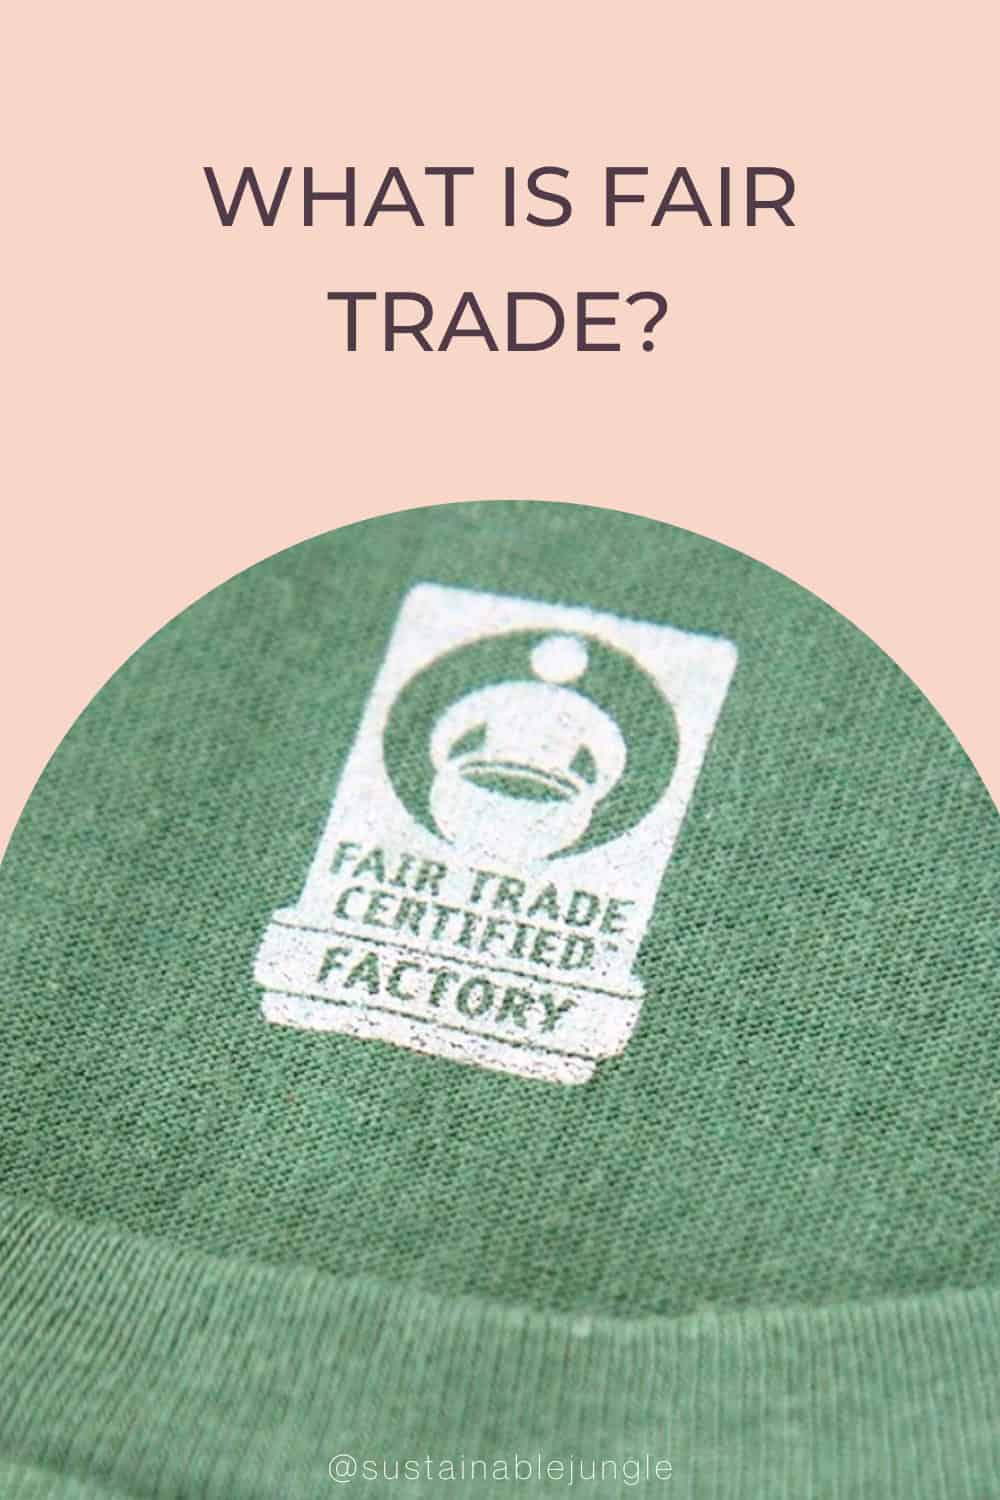 What Is Fair Trade? Image by prAna #whatisfairtrade #whatdoesfairtrademean #fairtradecertified #fairtradedefinition #fairtradeethids #fairtradecertifiedmeaning #sustainablejungle